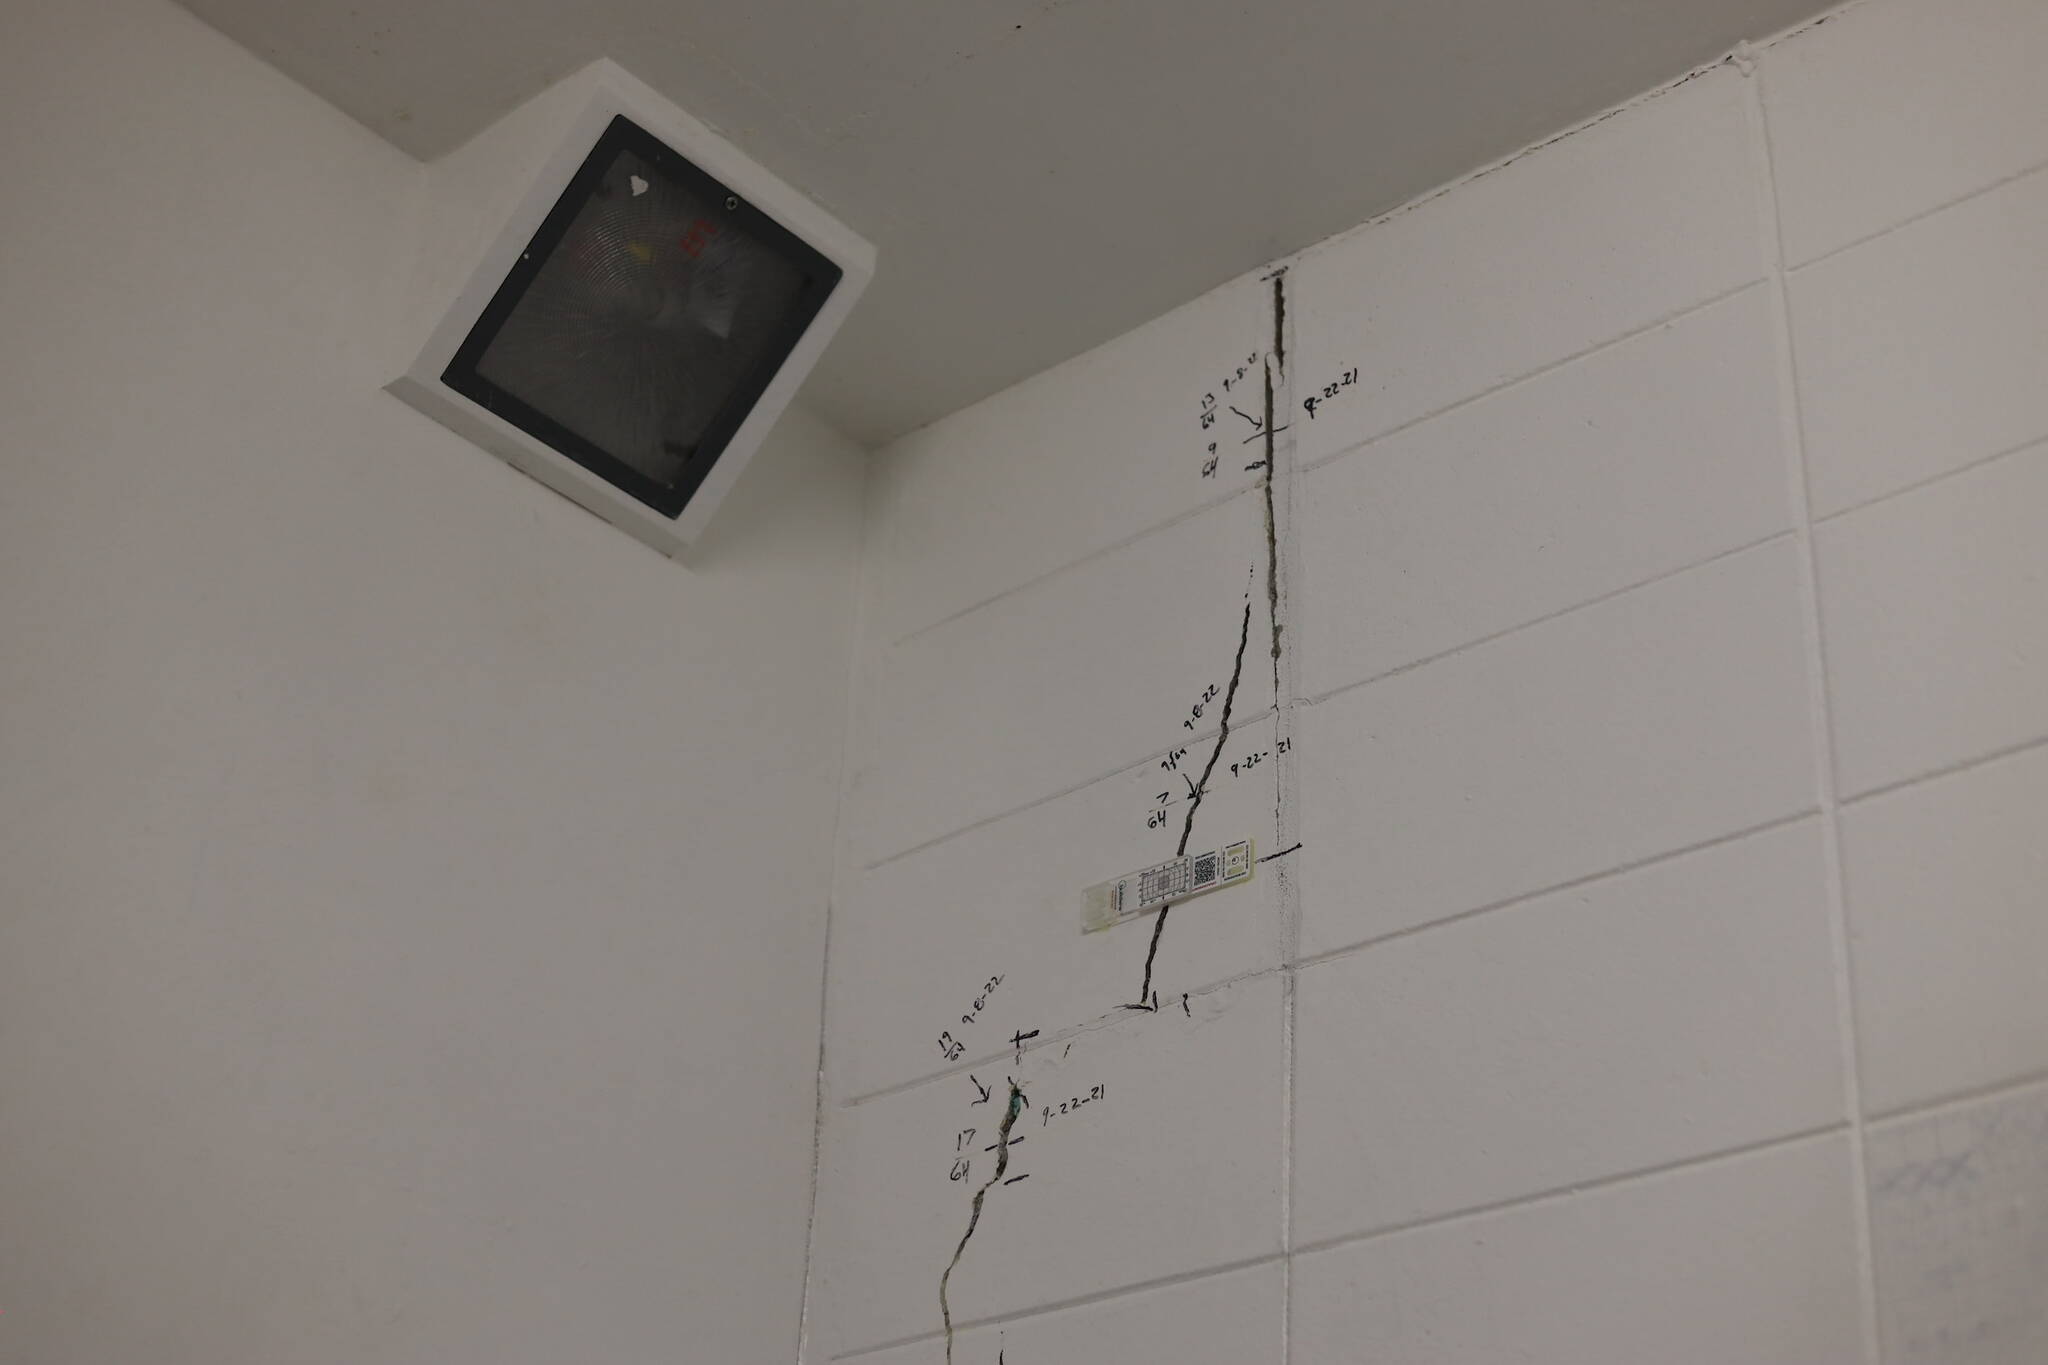 Measuring devices and markings surround cracks in the walls of a cell at Lemon Creek Correctional Center Monday. The prison is currently undergoing structural repairs and renovations following “extreme wet weather” last fall that caused instability at certain locations and prompted emergency repairs. (Clarise Larson / Juneau Empire)